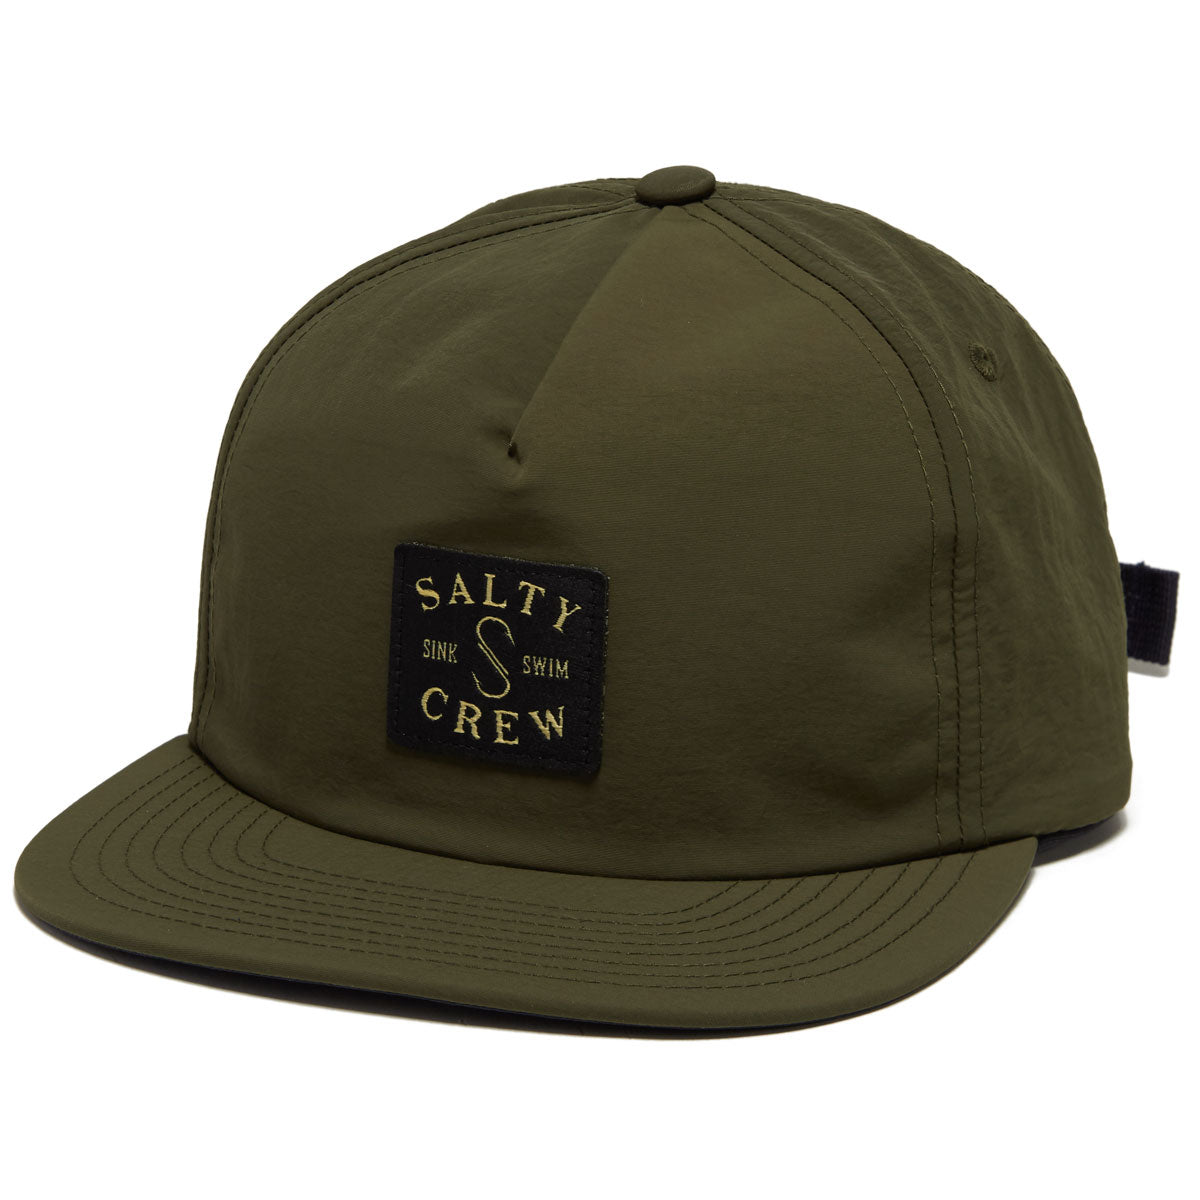 Salty Crew Clubhouse 5 Panel Hat - Olive image 1